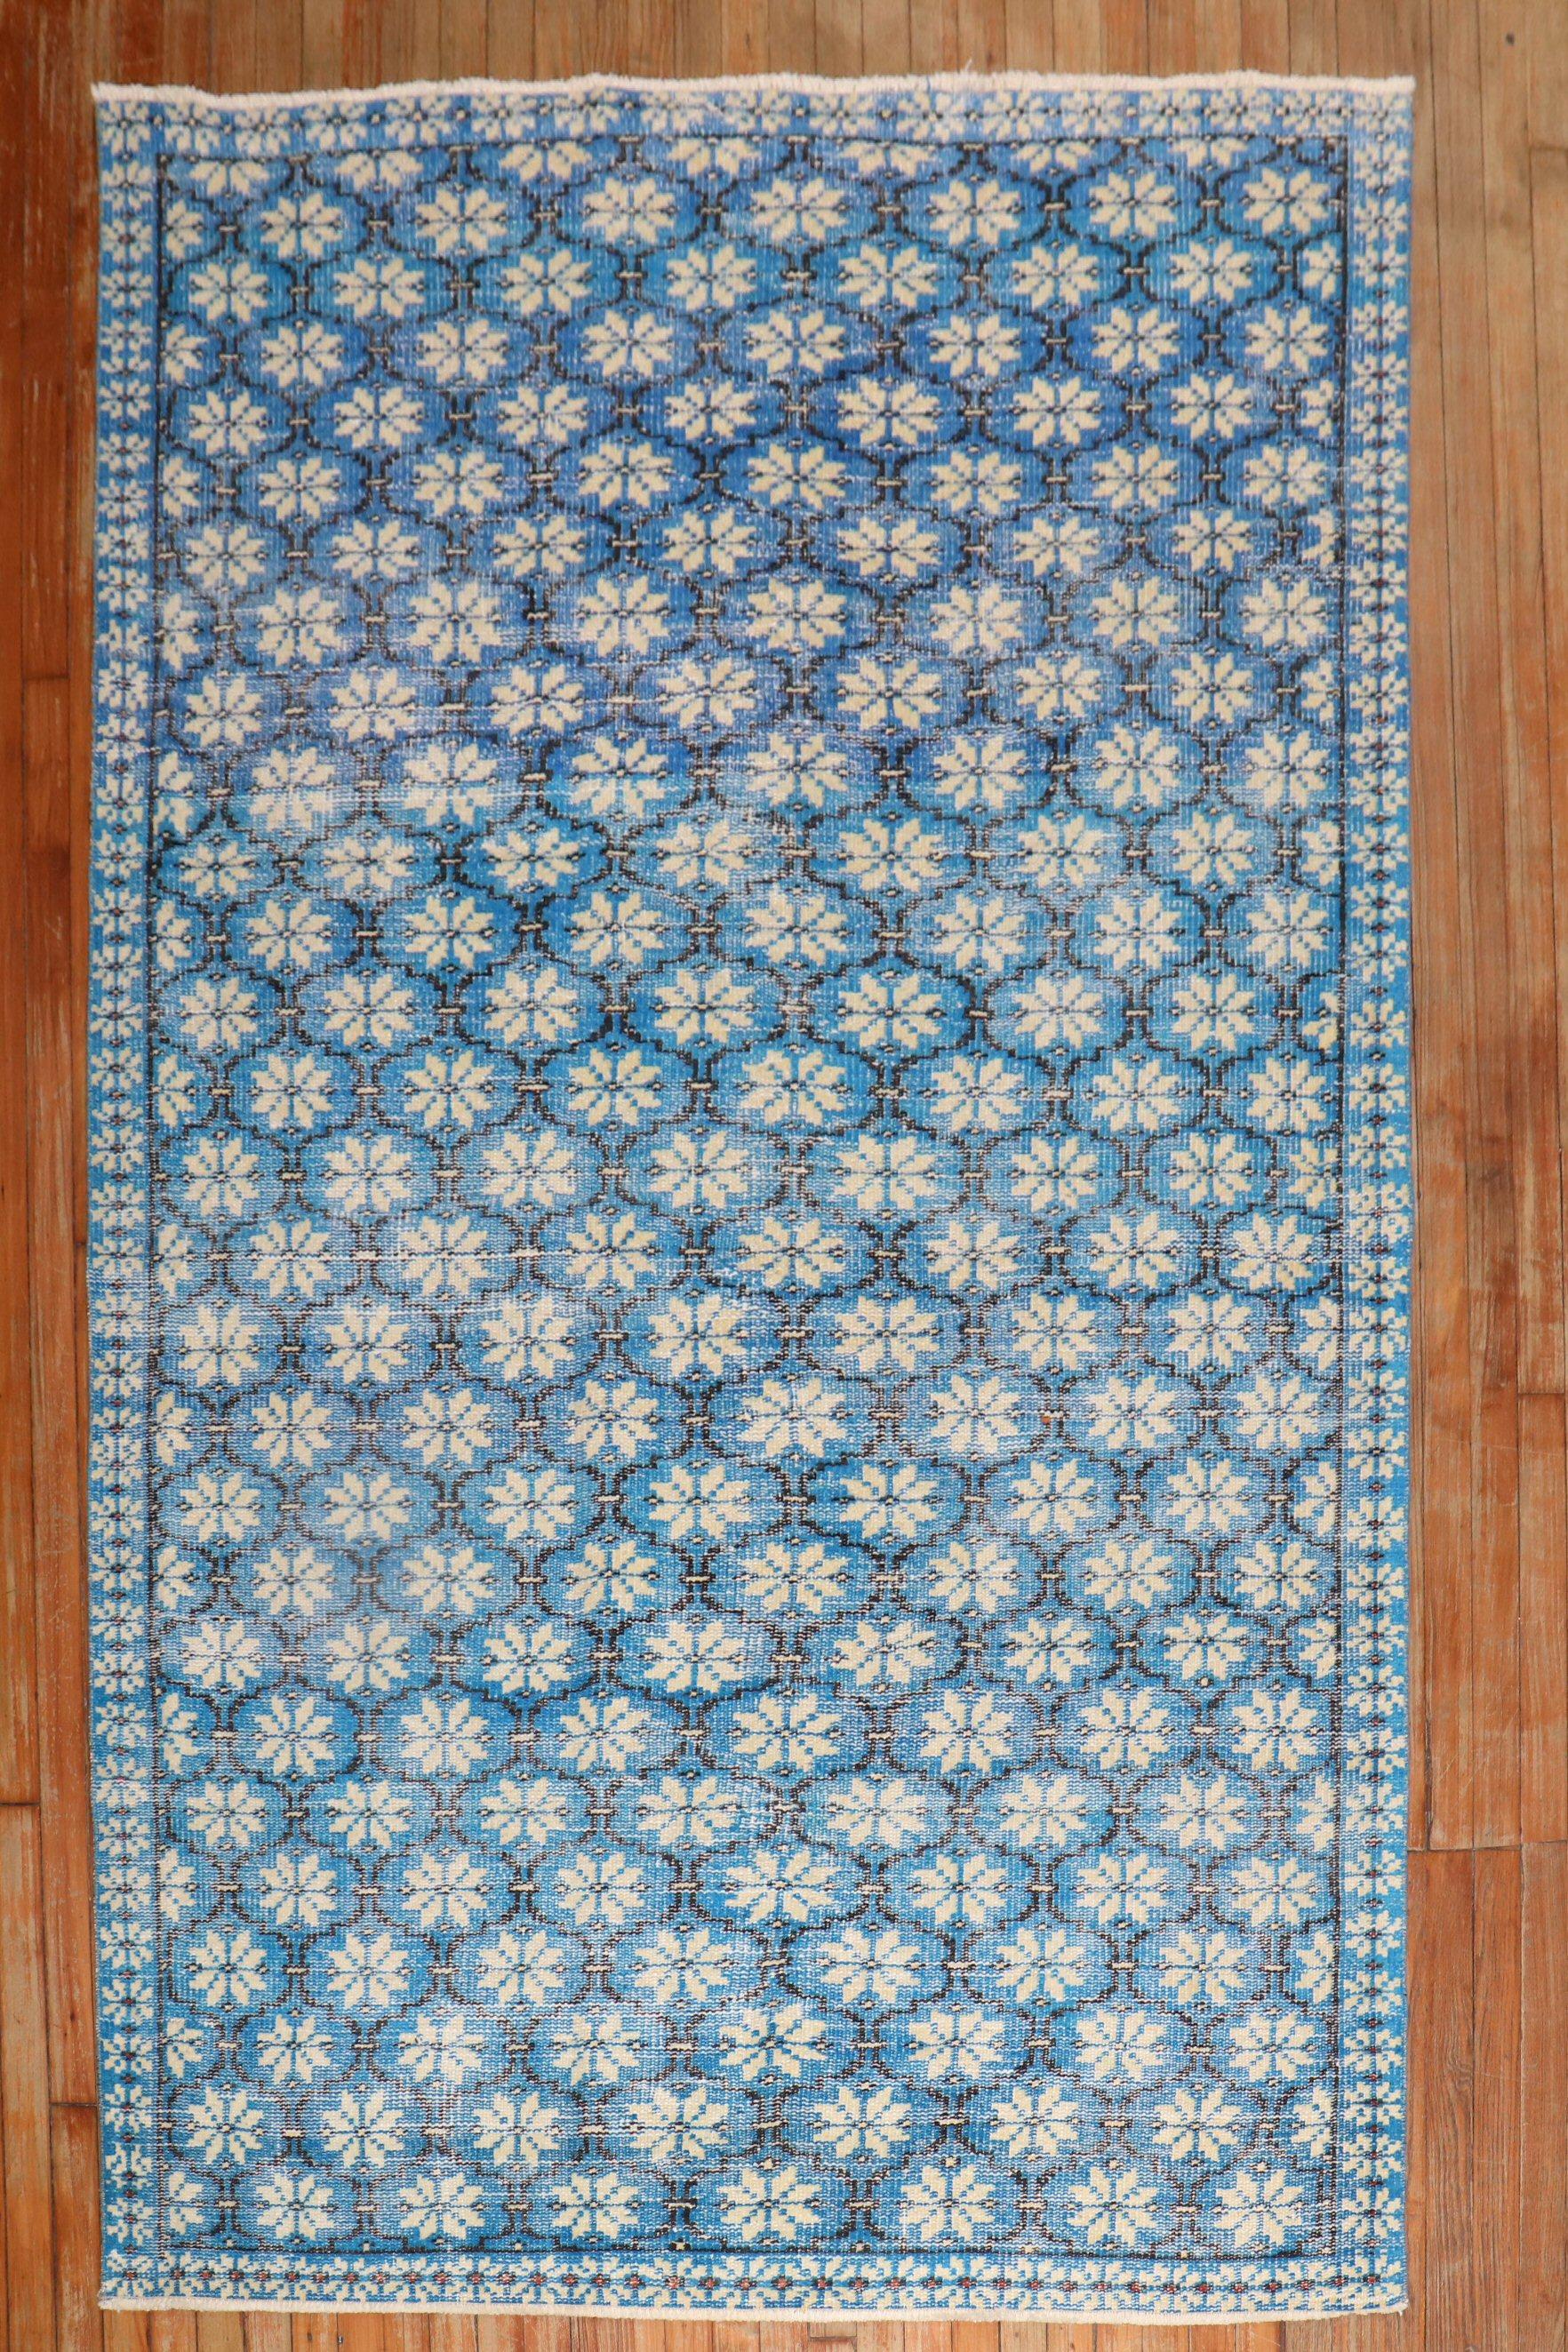 A Mid-20th worn Century Turkish Deco intermediate rug featuring a repetitive all-over design on a vivid blue ground

Measures: 5'3'' x 8'5''.